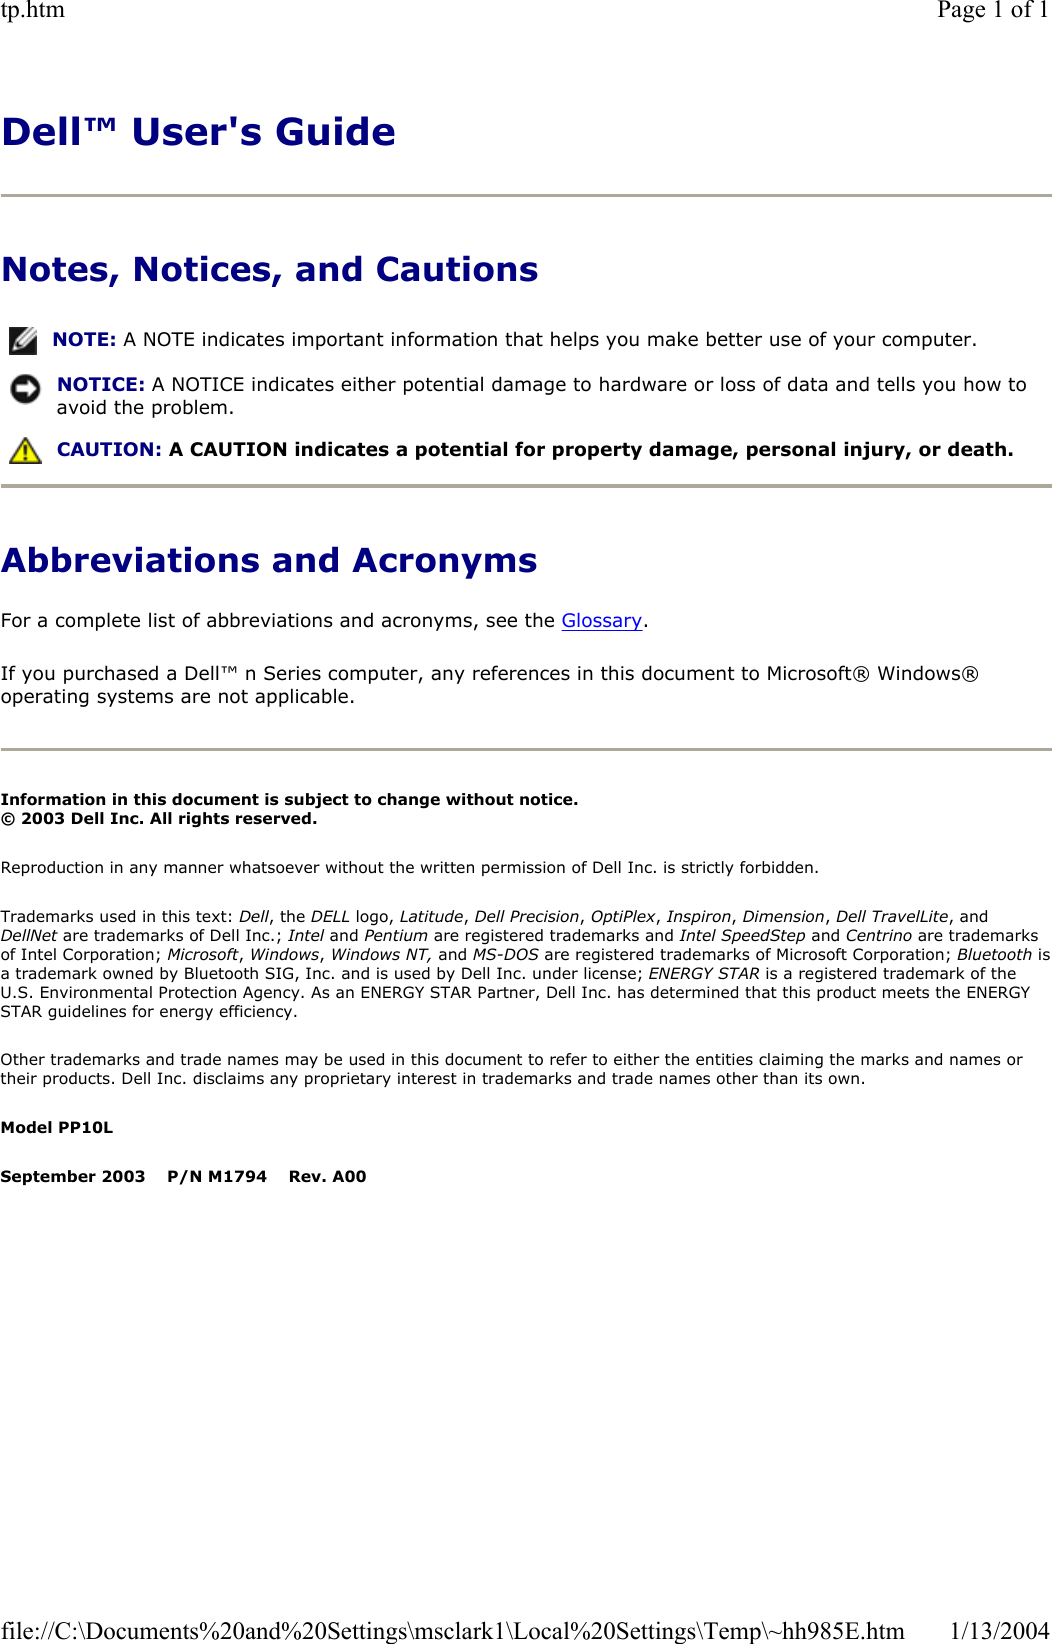 Dell™ User&apos;s GuideNotes, Notices, and Cautions Abbreviations and Acronyms For a complete list of abbreviations and acronyms, see the Glossary.If you purchased a Dell™ n Series computer, any references in this document to Microsoft® Windows® operating systems are not applicable. Information in this document is subject to change without notice. © 2003 Dell Inc. All rights reserved.Reproduction in any manner whatsoever without the written permission of Dell Inc. is strictly forbidden. Trademarks used in this text: Dell, the DELL logo, Latitude,Dell Precision,OptiPlex,Inspiron,Dimension,Dell TravelLite, and DellNet are trademarks of Dell Inc.; Intel and Pentium are registered trademarks and Intel SpeedStep and Centrino are trademarks of Intel Corporation; Microsoft,Windows, Windows NT, and MS-DOS are registered trademarks of Microsoft Corporation; Bluetooth isa trademark owned by Bluetooth SIG, Inc. and is used by Dell Inc. under license; ENERGY STAR is a registered trademark of the U.S. Environmental Protection Agency. As an ENERGY STAR Partner, Dell Inc. has determined that this product meets the ENERGY STAR guidelines for energy efficiency. Other trademarks and trade names may be used in this document to refer to either the entities claiming the marks and names or their products. Dell Inc. disclaims any proprietary interest in trademarks and trade names other than its own. Model PP10LSeptember 2003    P/N M1794    Rev. A00NOTE: A NOTE indicates important information that helps you make better use of your computer.NOTICE: A NOTICE indicates either potential damage to hardware or loss of data and tells you how to avoid the problem.CAUTION: A CAUTION indicates a potential for property damage, personal injury, or death. Page 1 of 1tp.htm1/13/2004file://C:\Documents%20and%20Settings\msclark1\Local%20Settings\Temp\~hh985E.htm